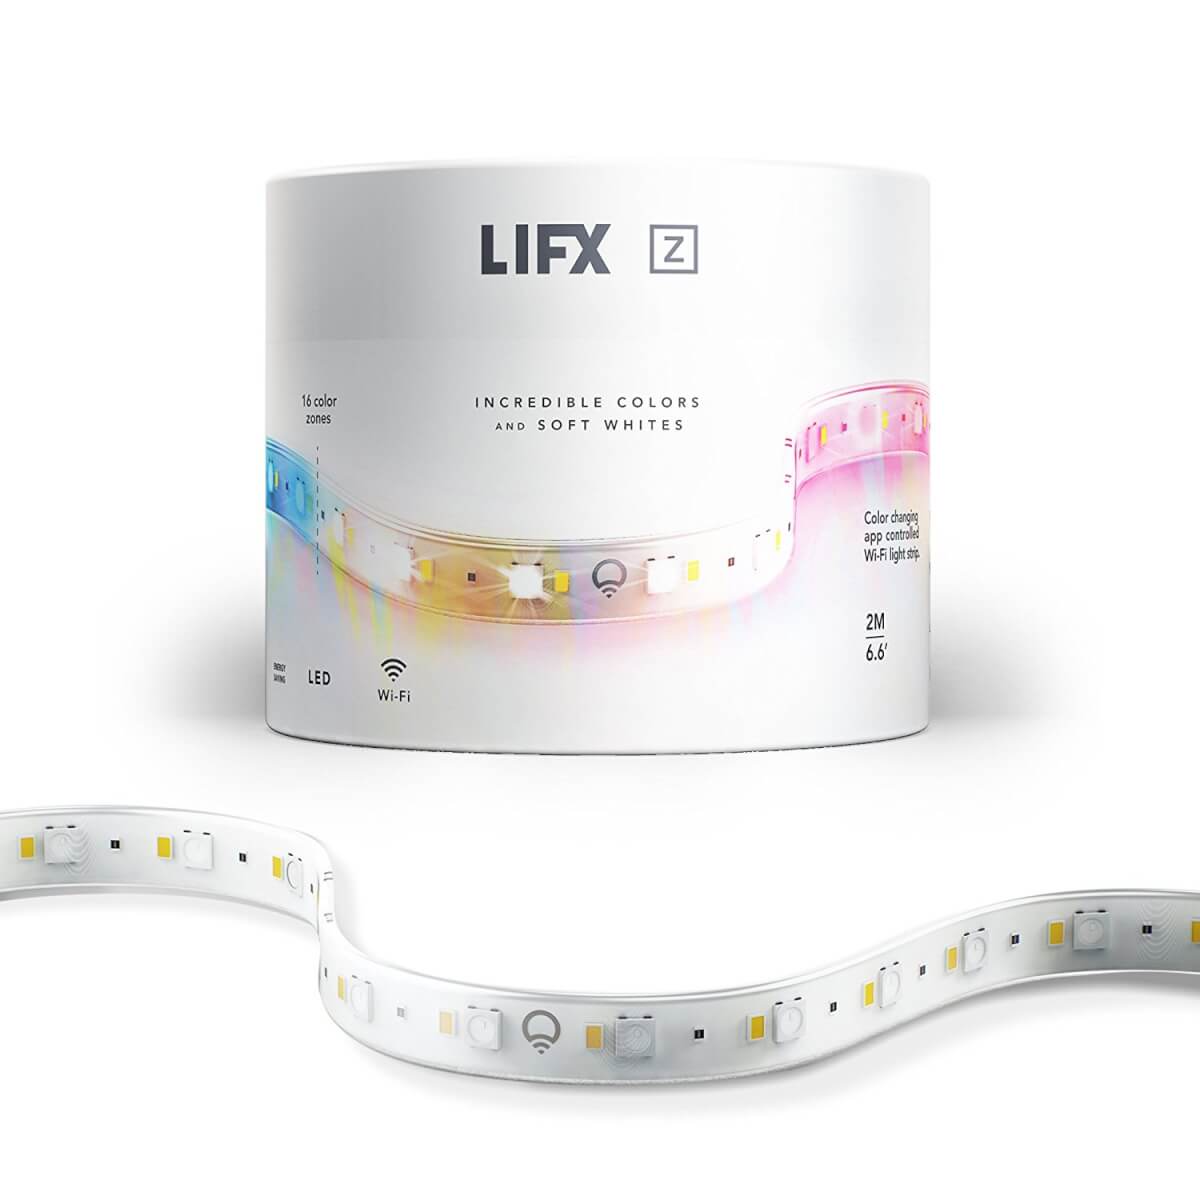 lifx z packaging